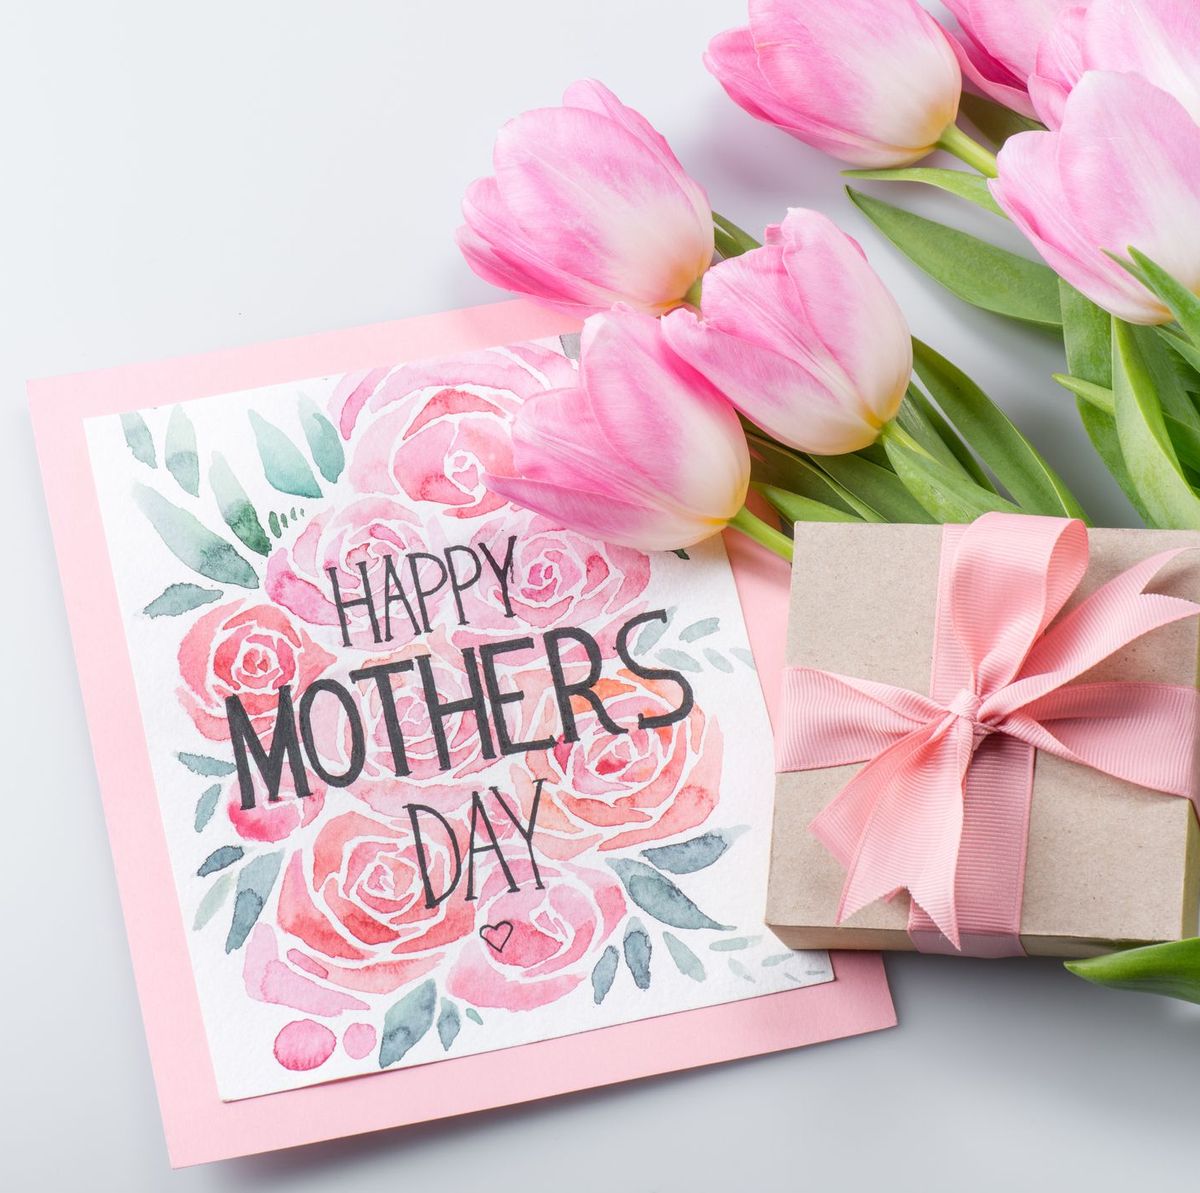 50 Mother's Day Card Messages and Wishes - What to Write in a ...